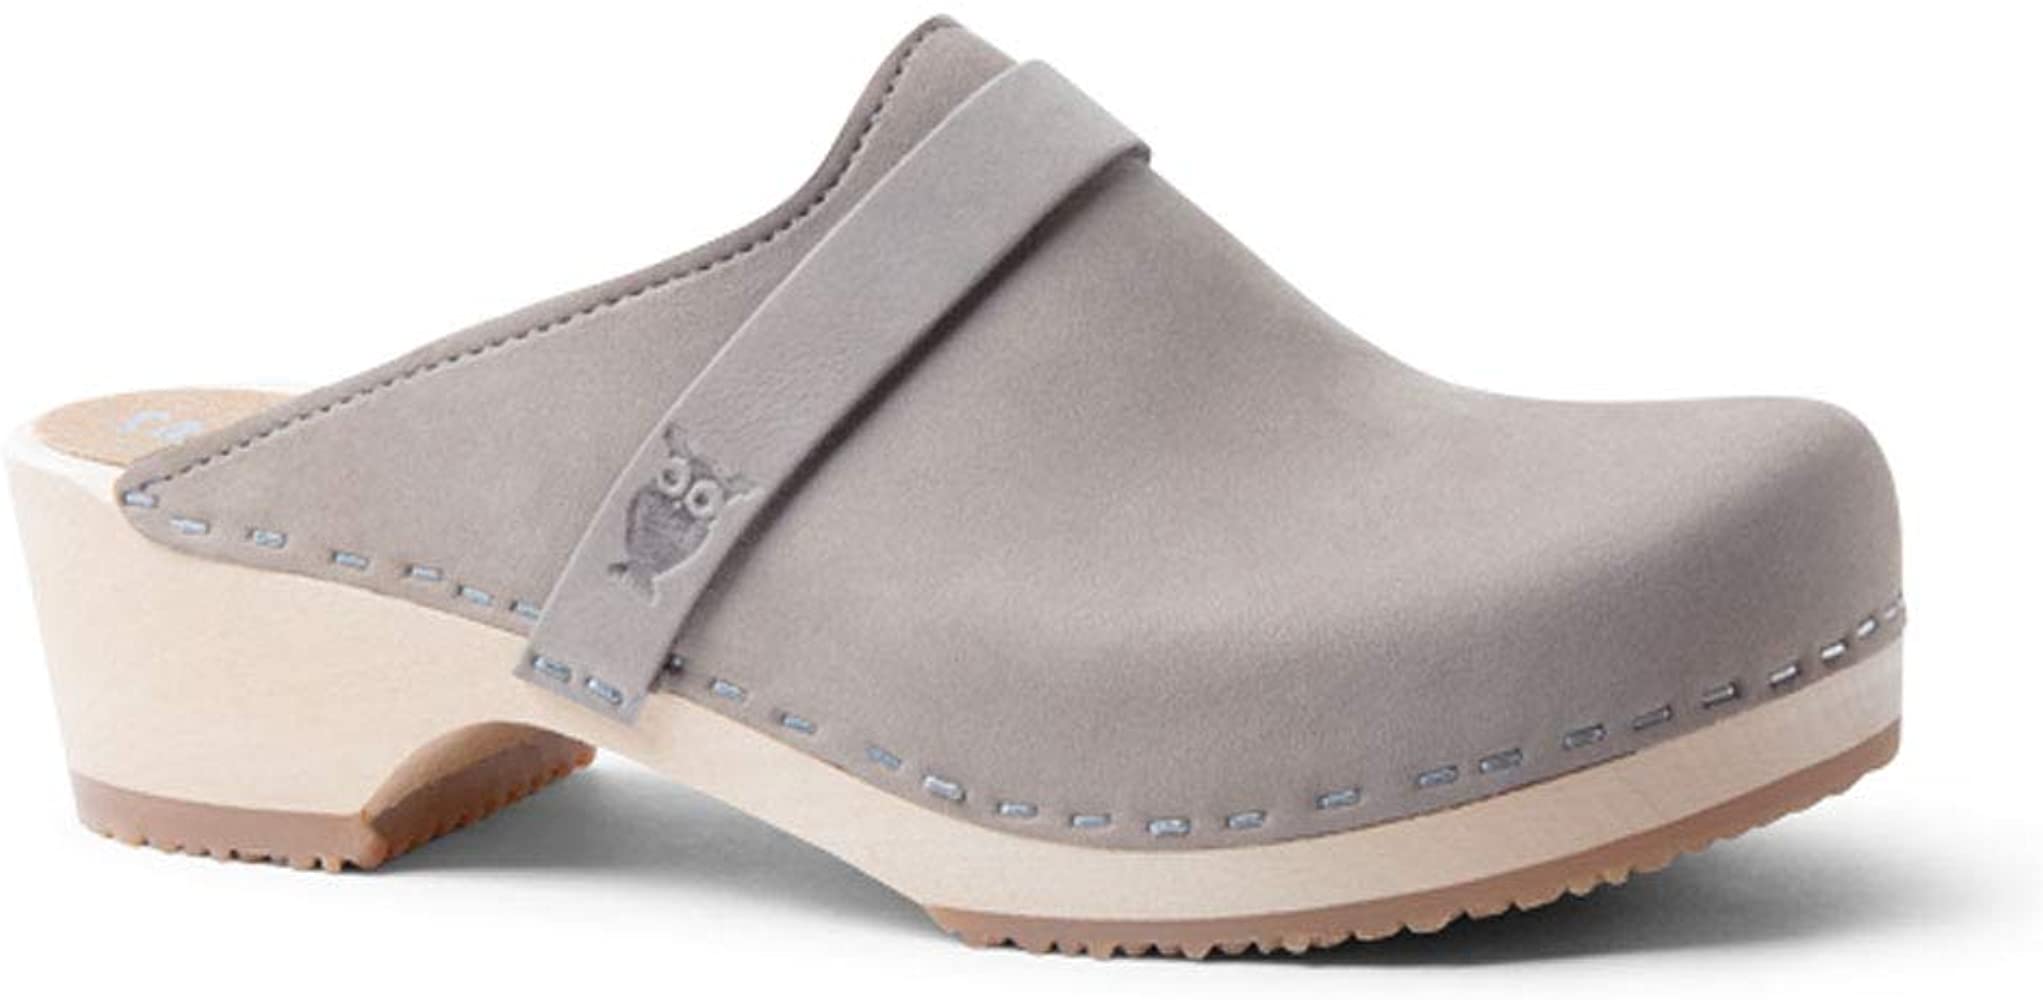 most-comfortable-clogs-for-women